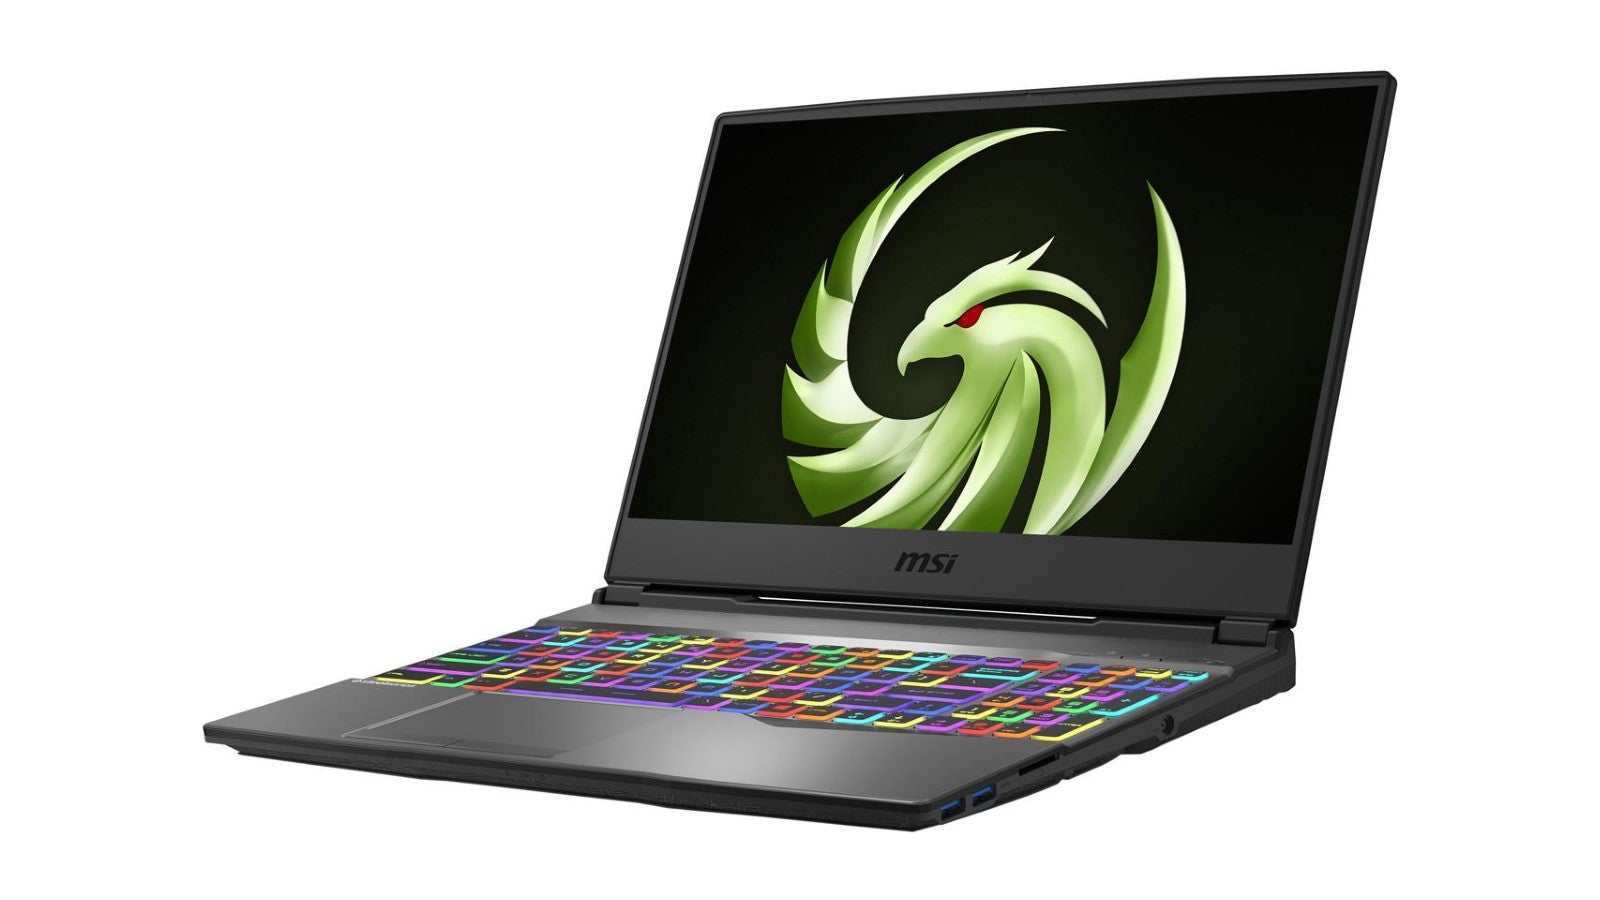 A photo of the MSI Alpha 15 gaming laptop